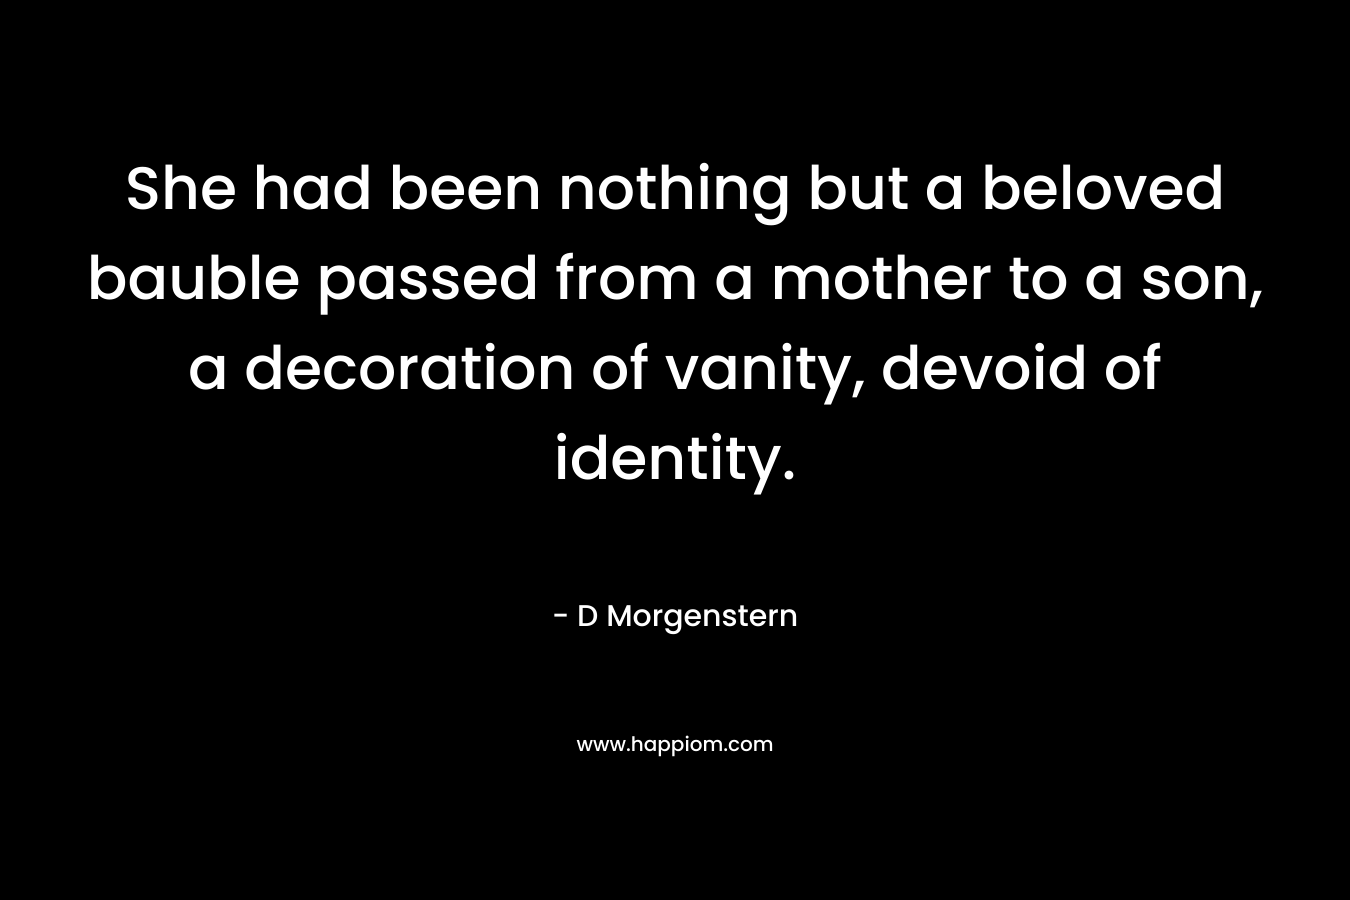 She had been nothing but a beloved bauble passed from a mother to a son, a decoration of vanity, devoid of identity. – D Morgenstern